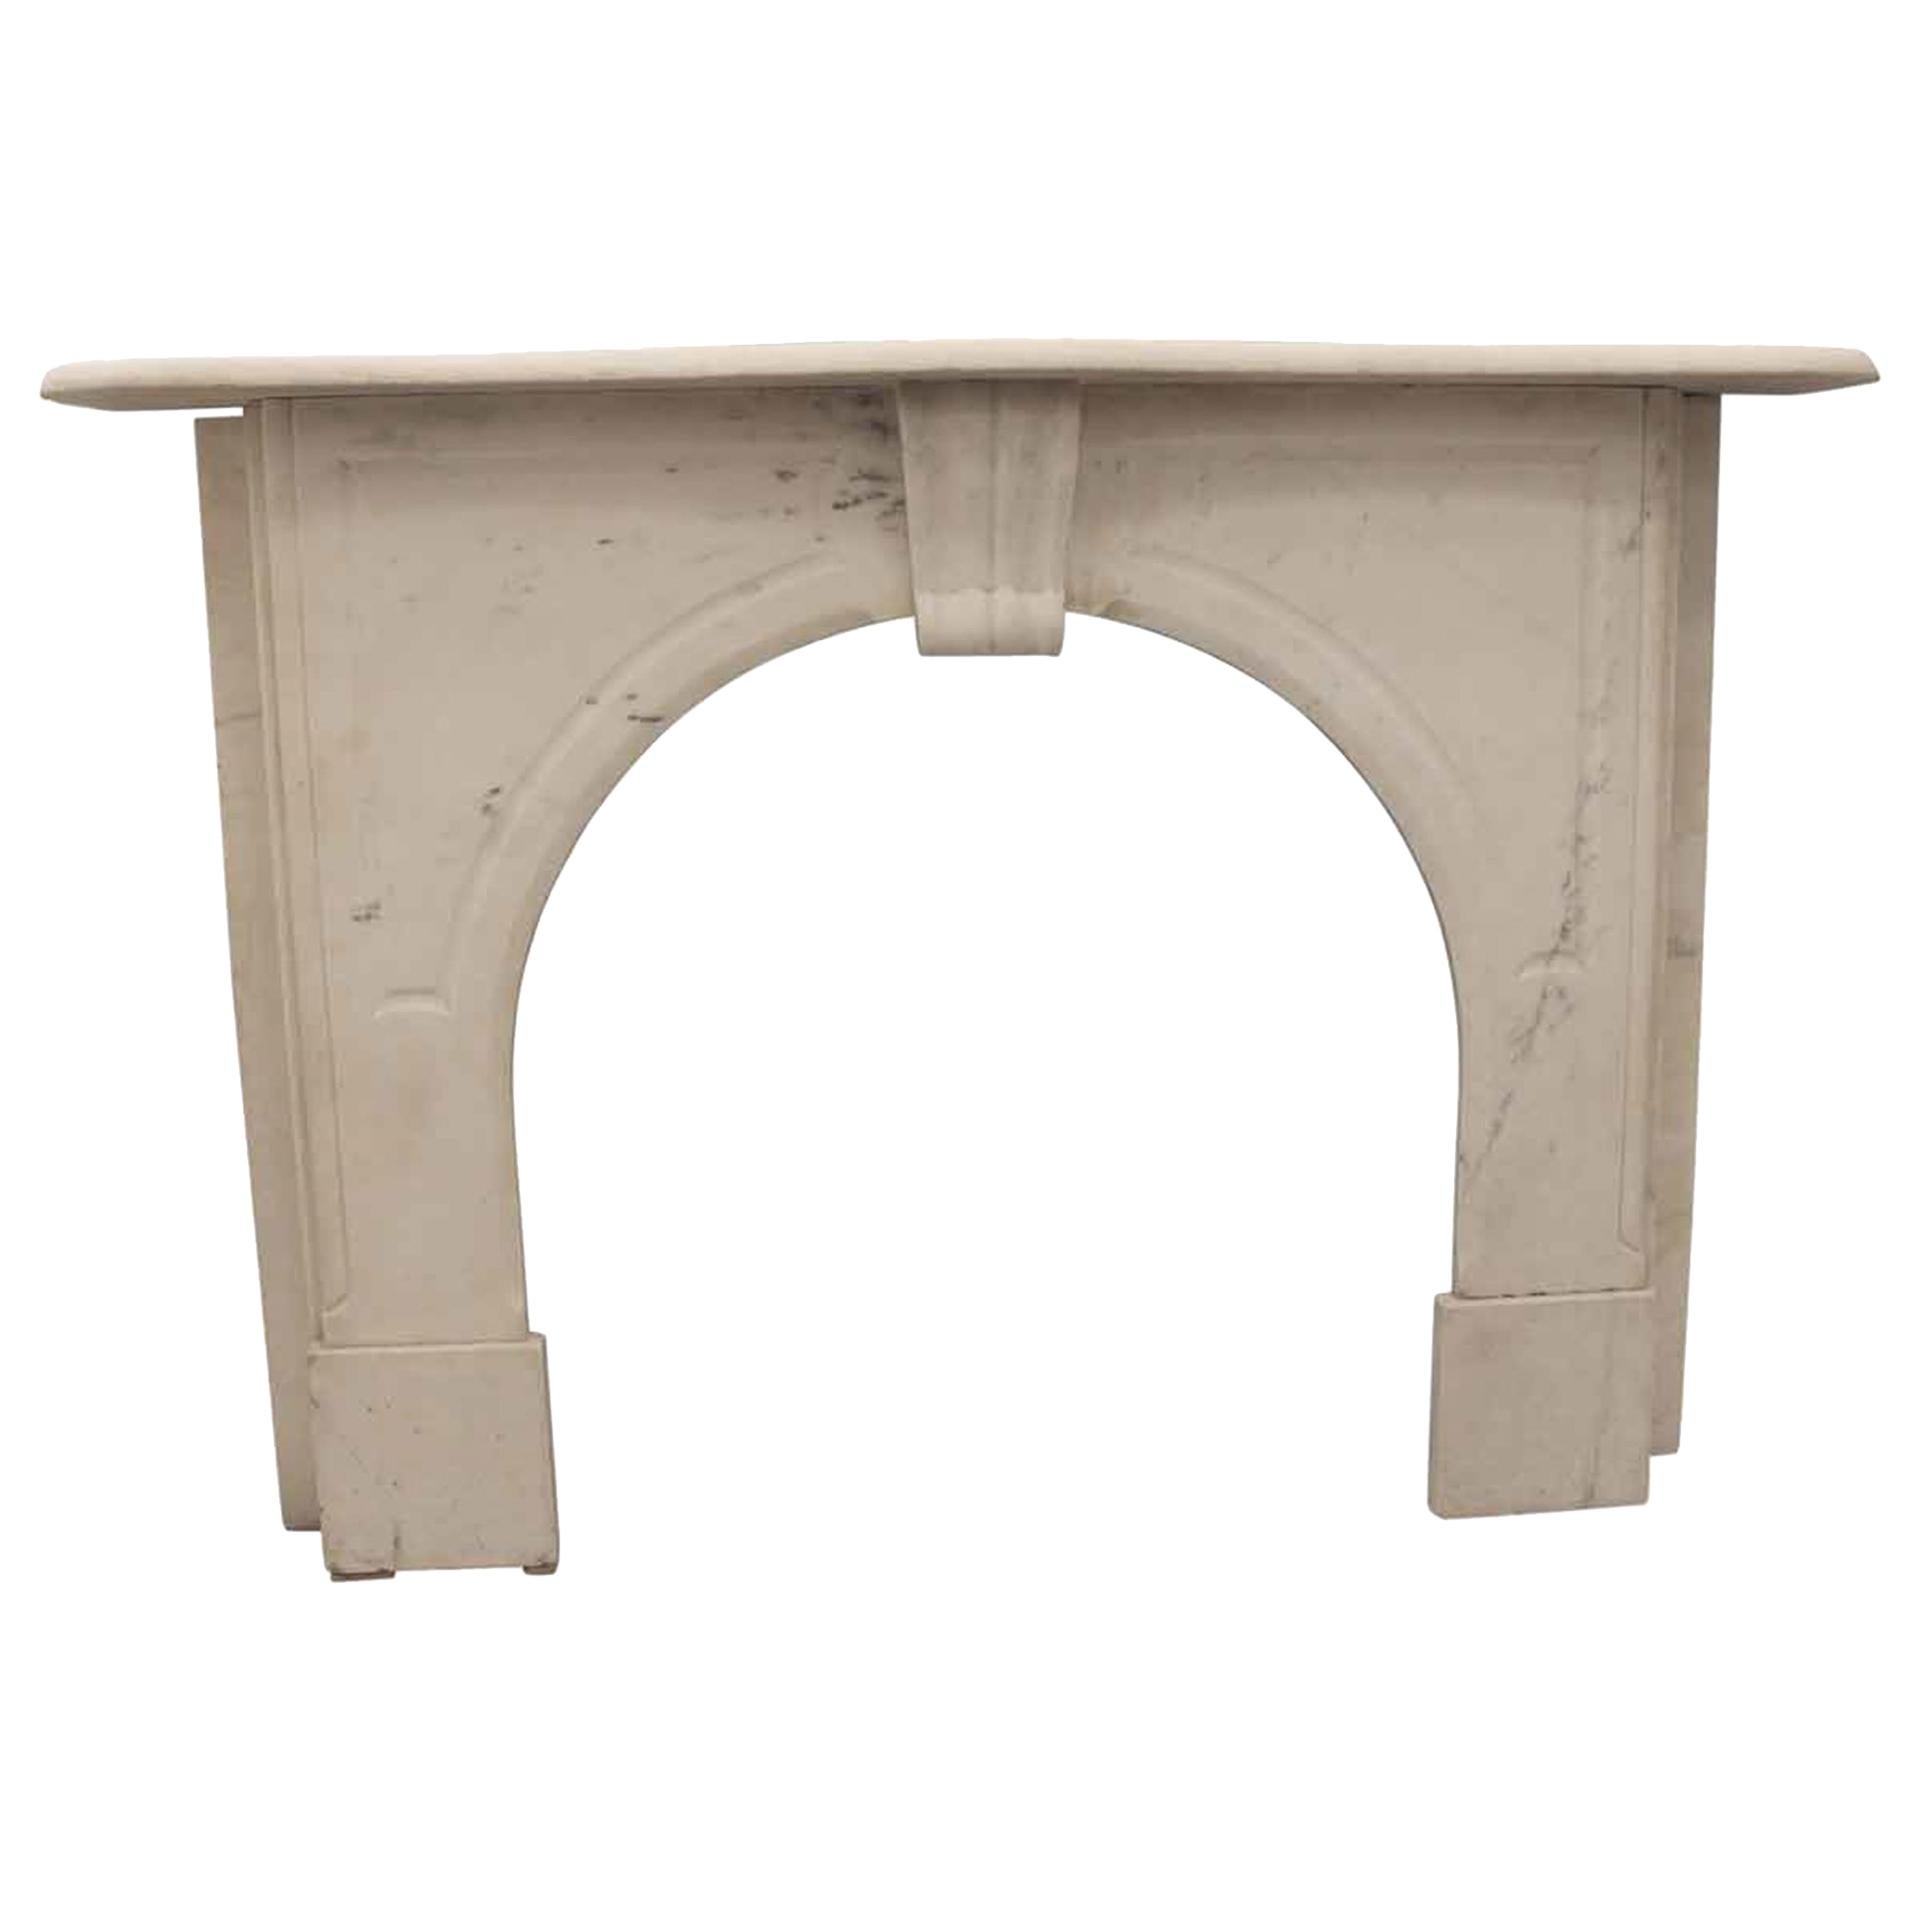 1910 New York Brownstone Arched White Carved Marble Mantel